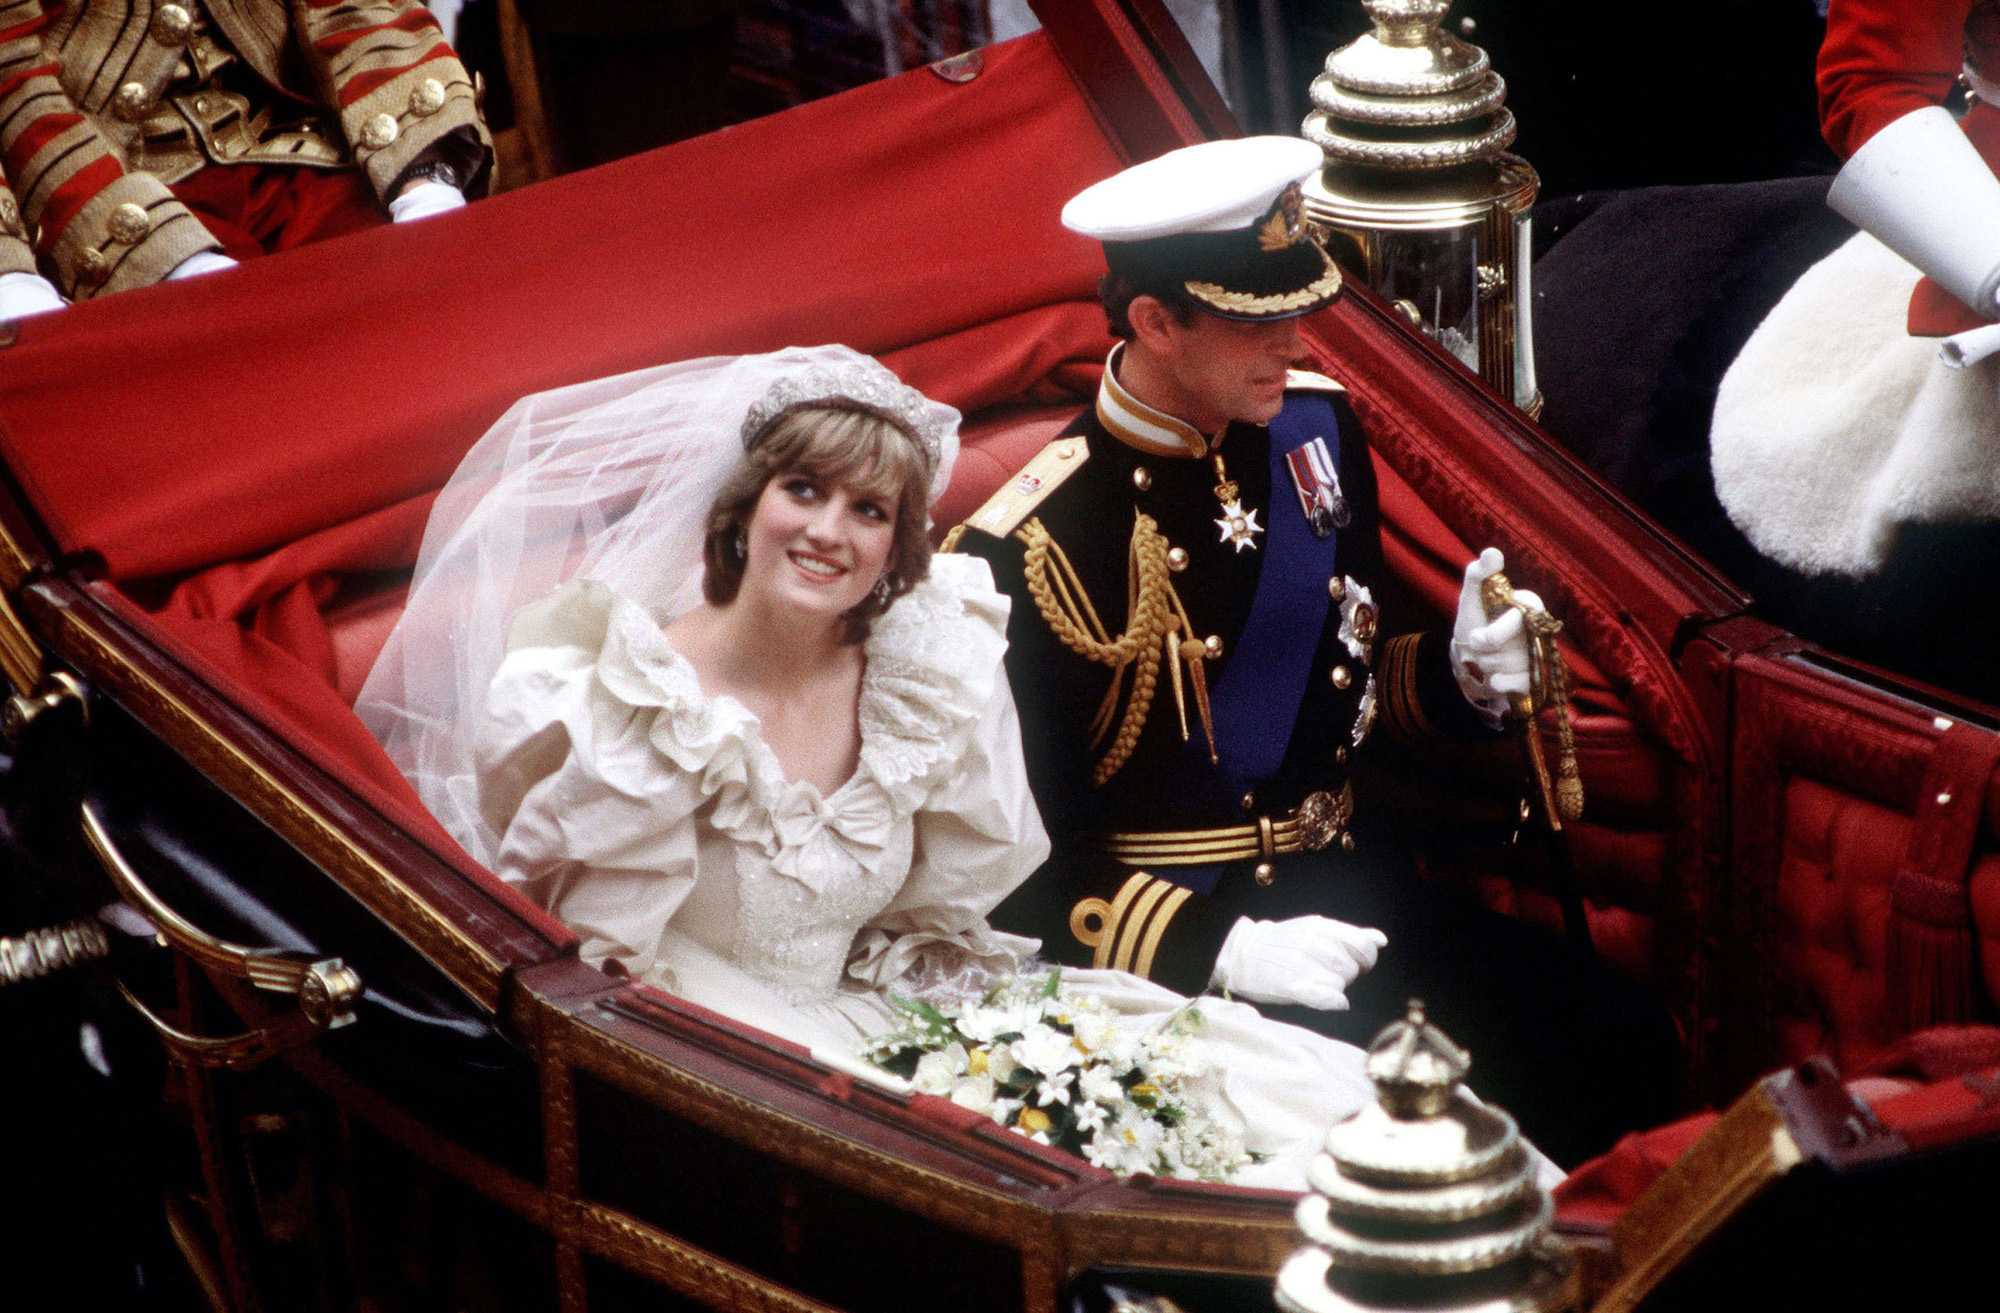 Princess Diana and Prince Charles ride in a carriage back to Buckingham Palace following their 1981 royal wedding